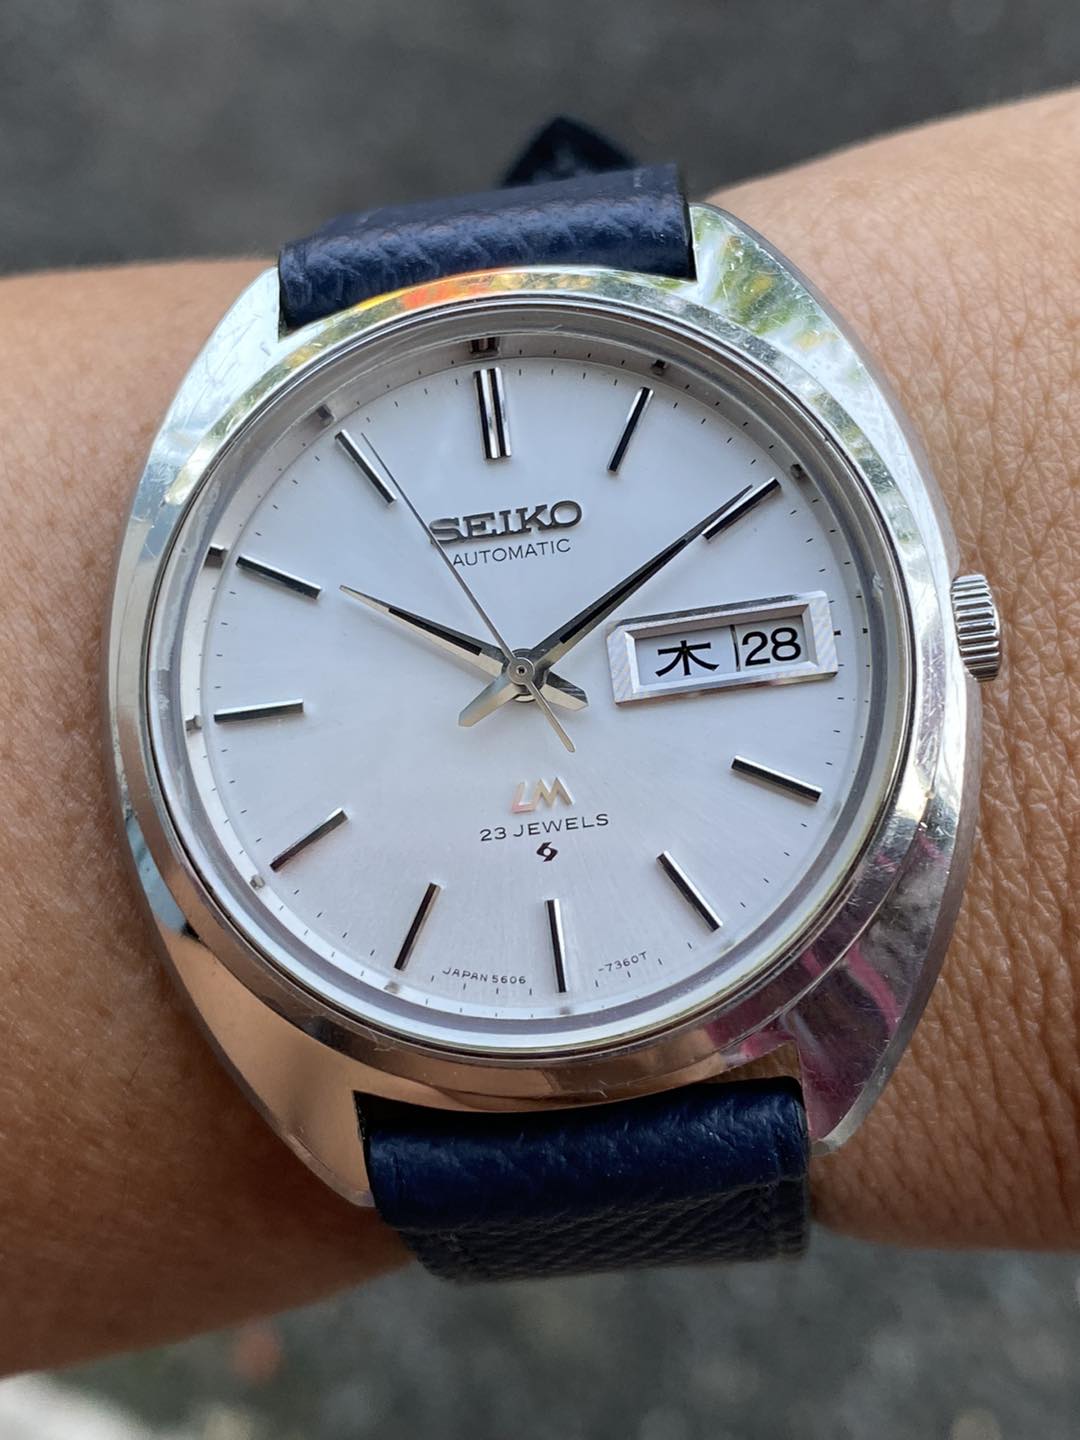 Seiko LM automatic, Cal.5606-7150 Case no.252447 , made in Japan